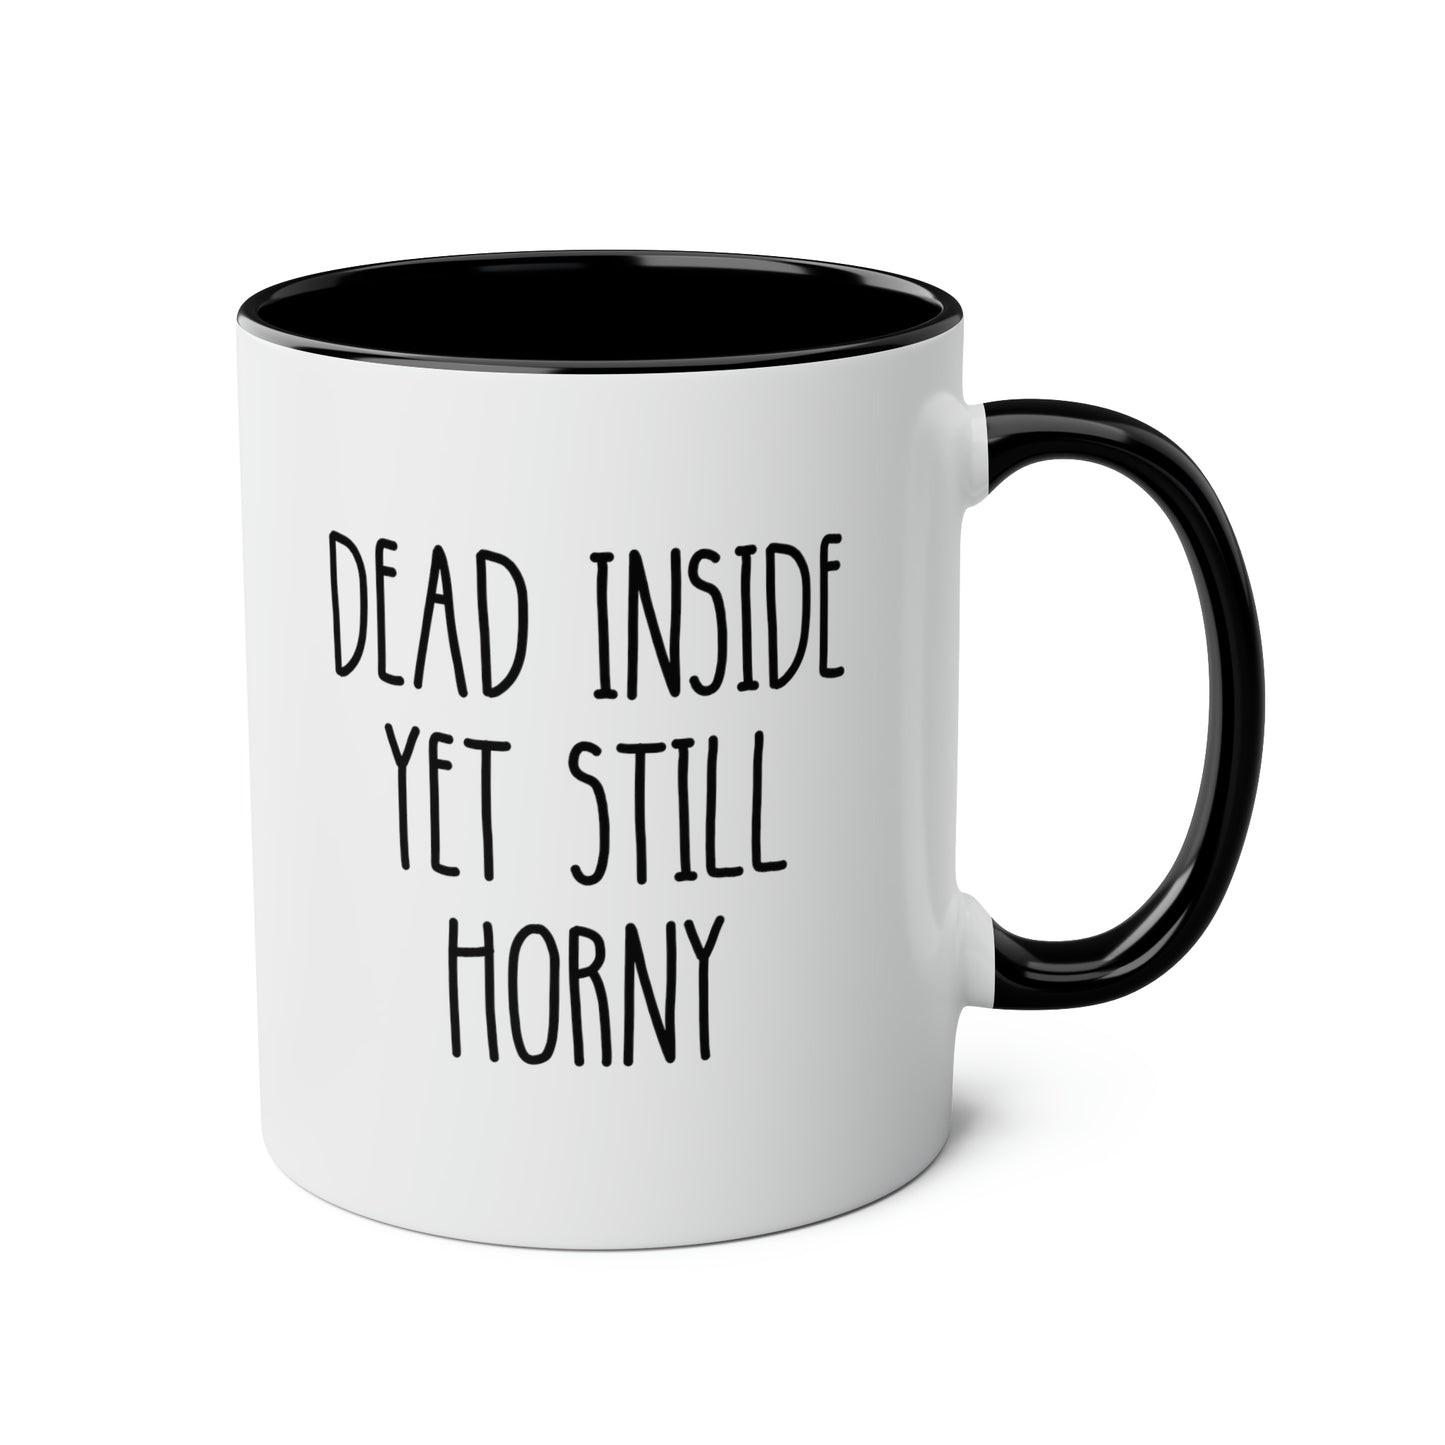 Dead Inside Yet Still Horny 11oz white with black accent funny large coffee mug gift for him boyfriend husband rude curse valentines anniversary waveywares wavey wares wavywares wavy wares